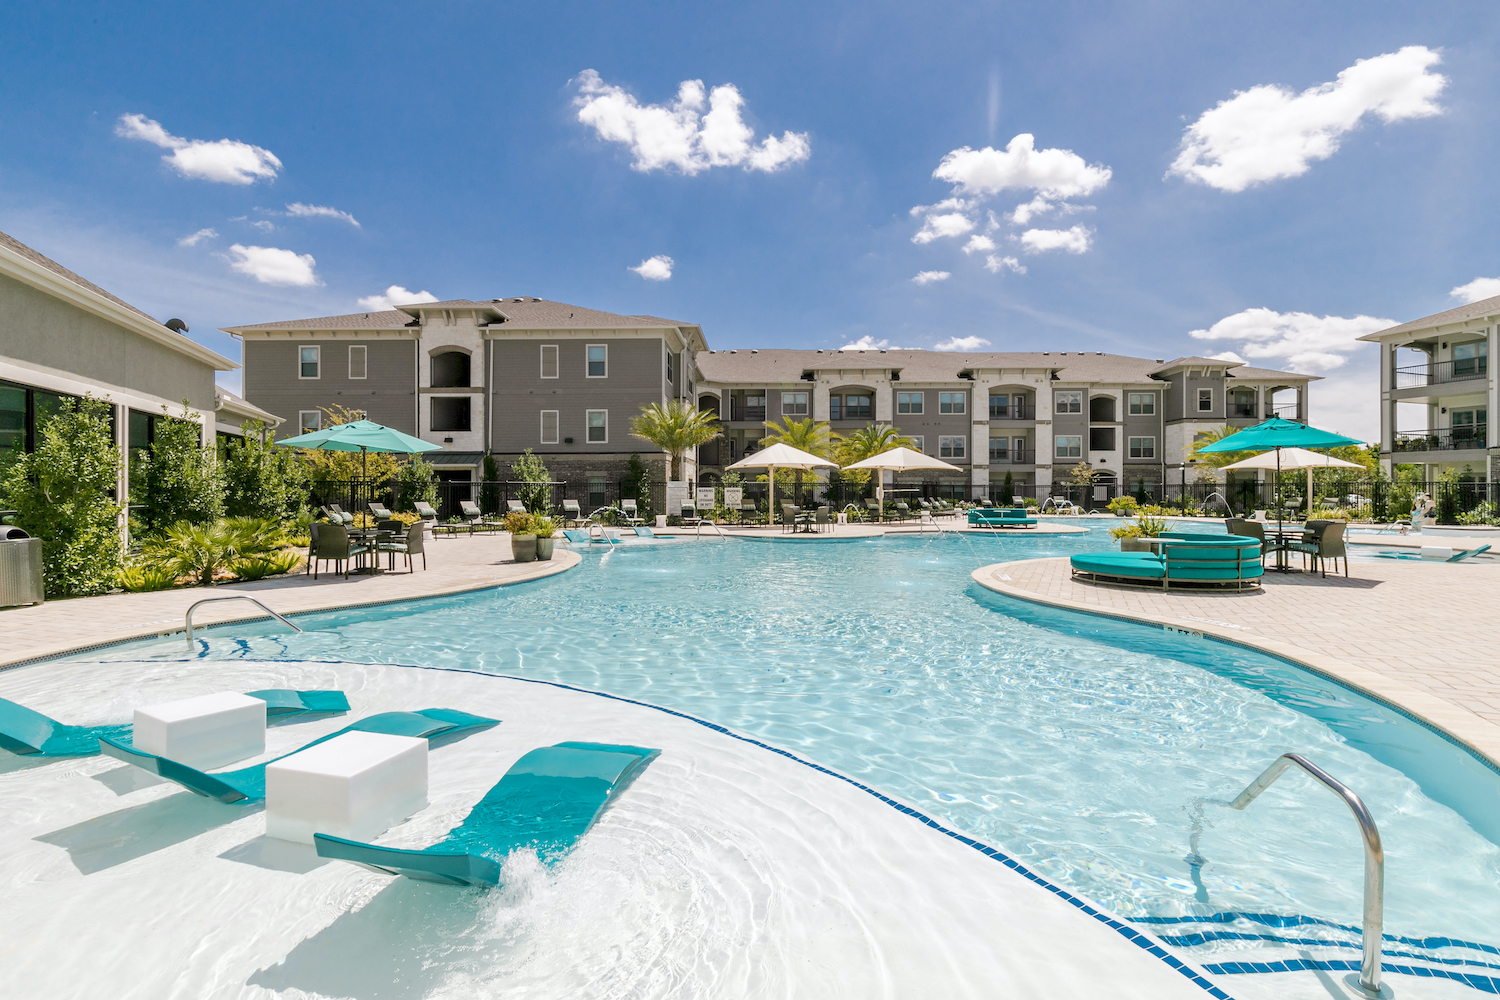 CORE Pacific Advisors Buys Multifamily Property Near Houston for DST Offering